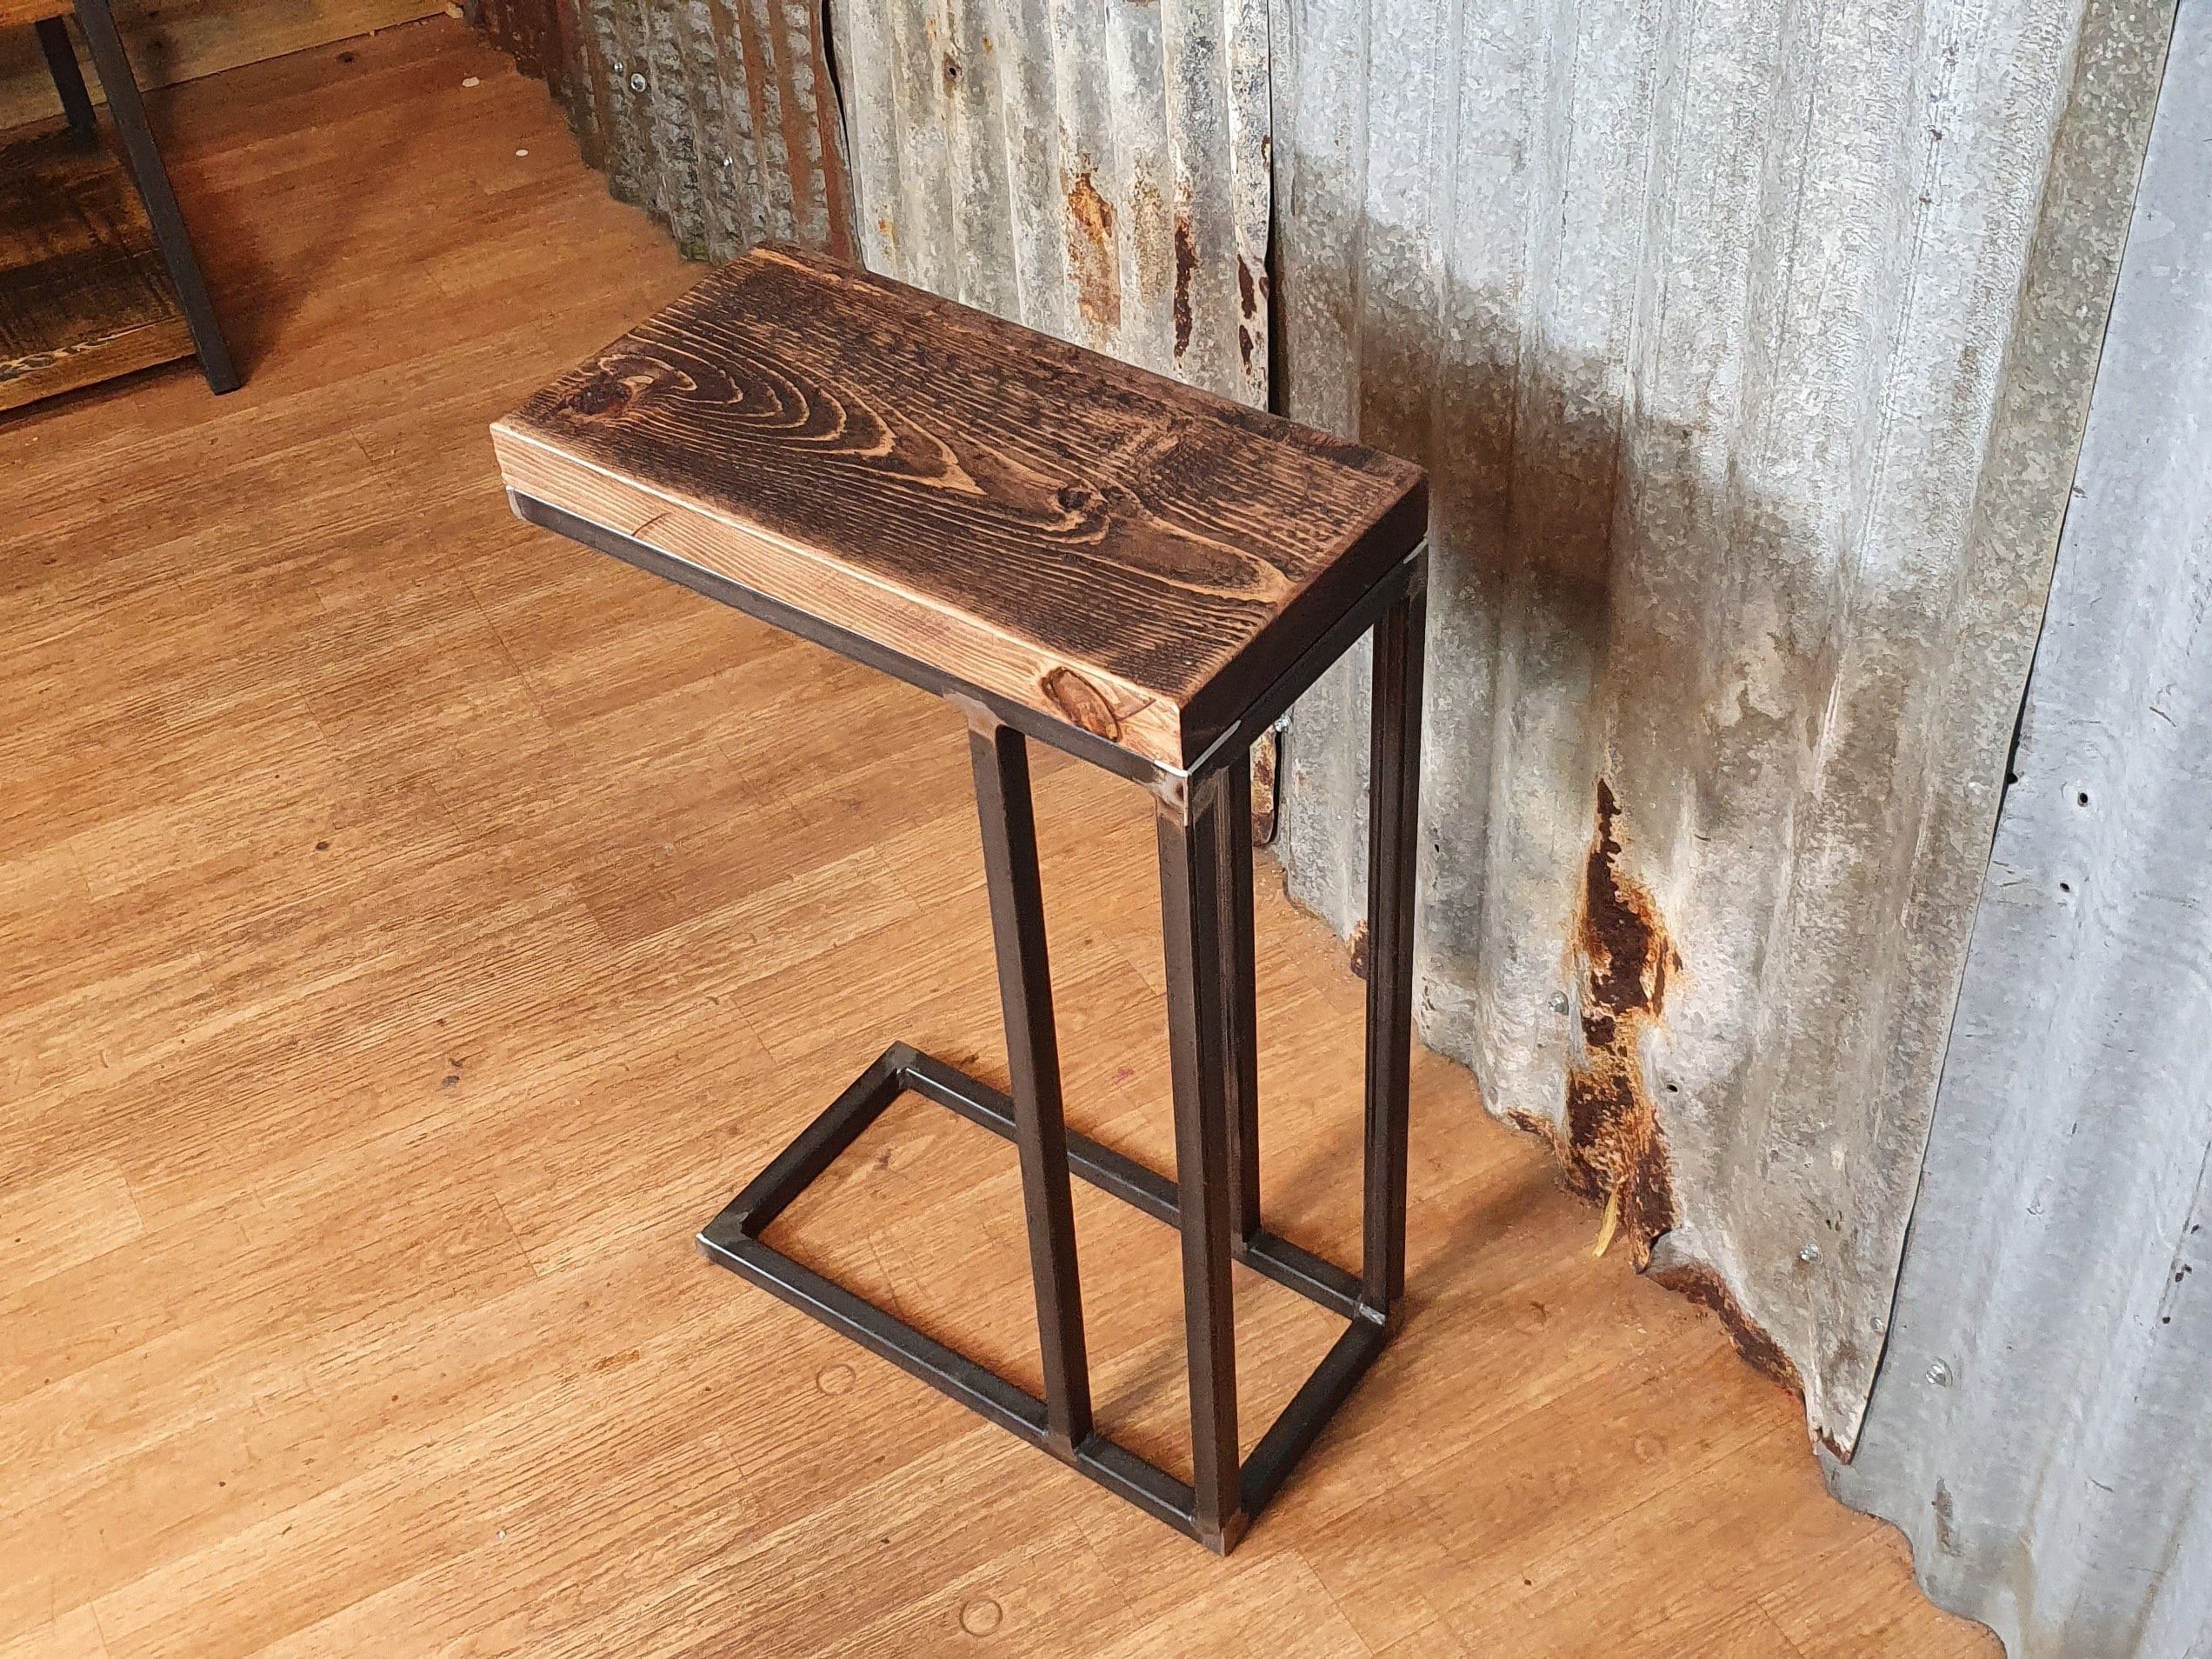 Most Recent Rustic Industrial Sofa Side Table, Wooden C Shaped Lap Within Barnside Round Console Tables (View 7 of 10)